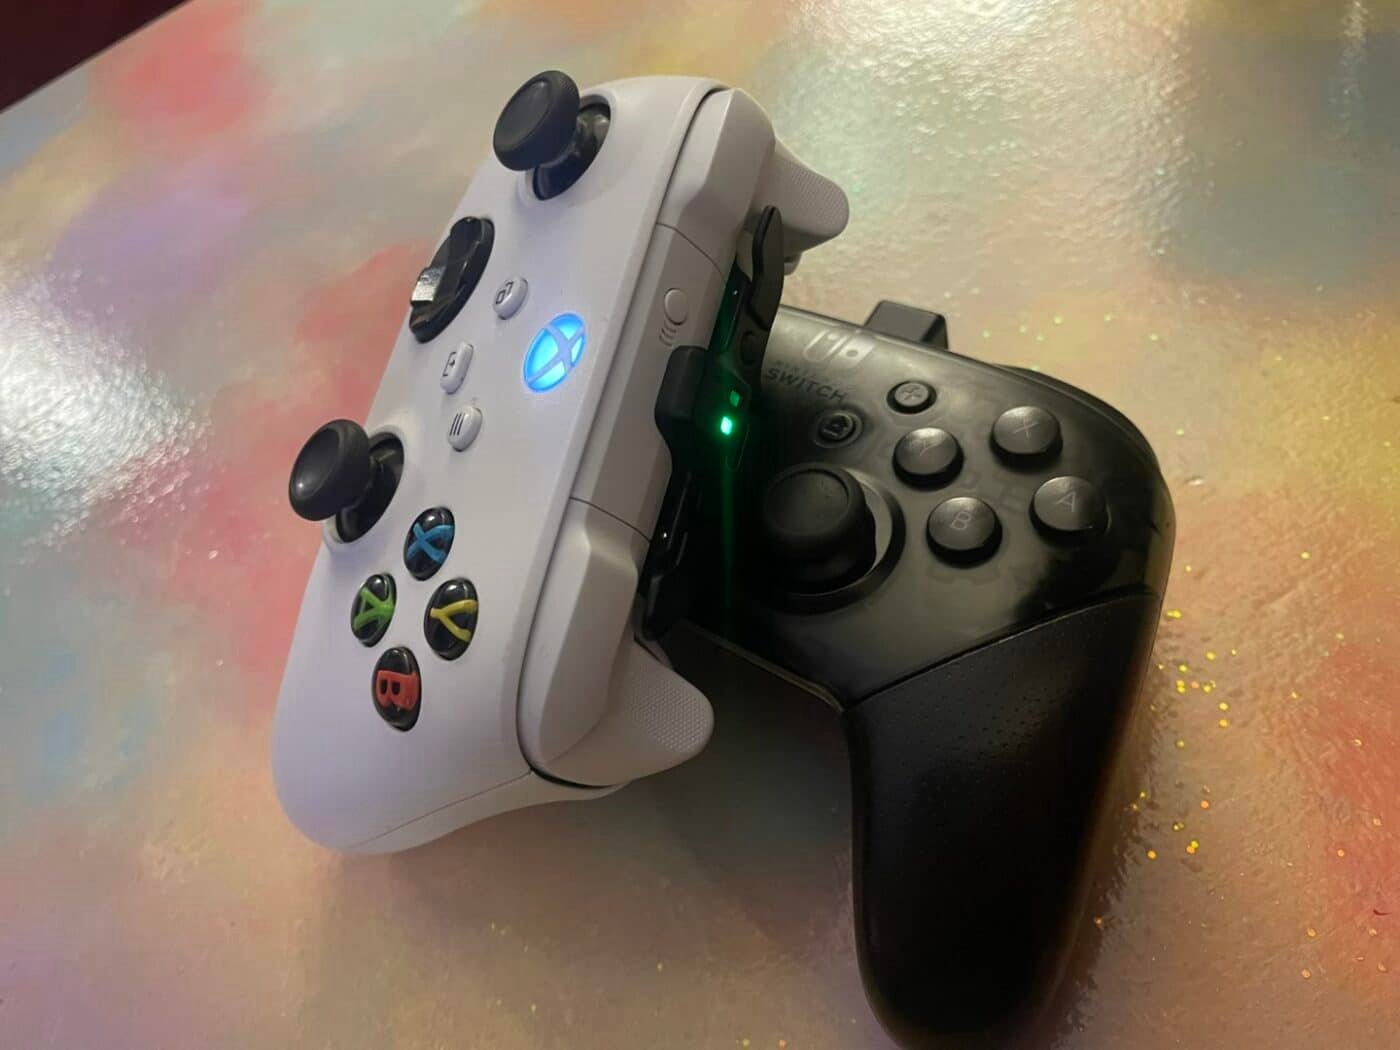 The retroflag xbox series controllers superpack turns your series controller into a switch controller.